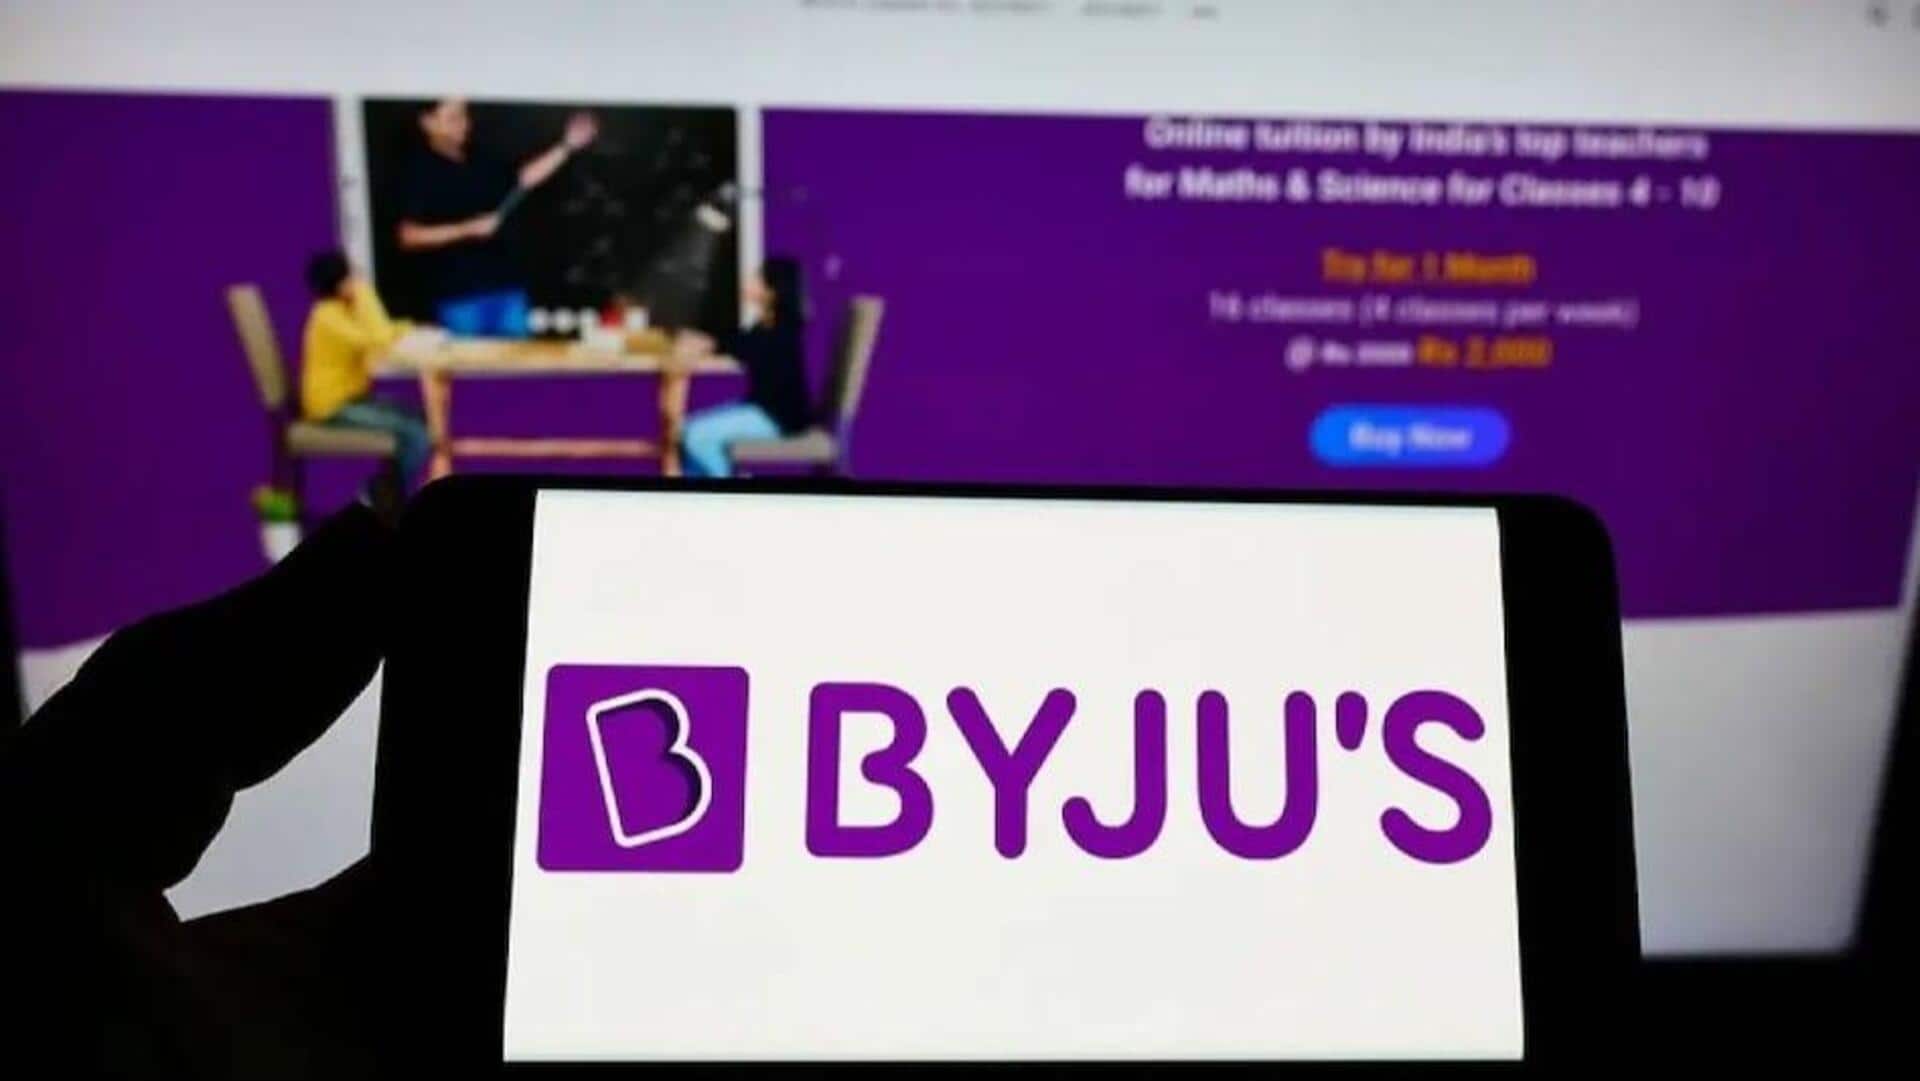 BYJU'S invites dissenting shareholders to participate in rights issue